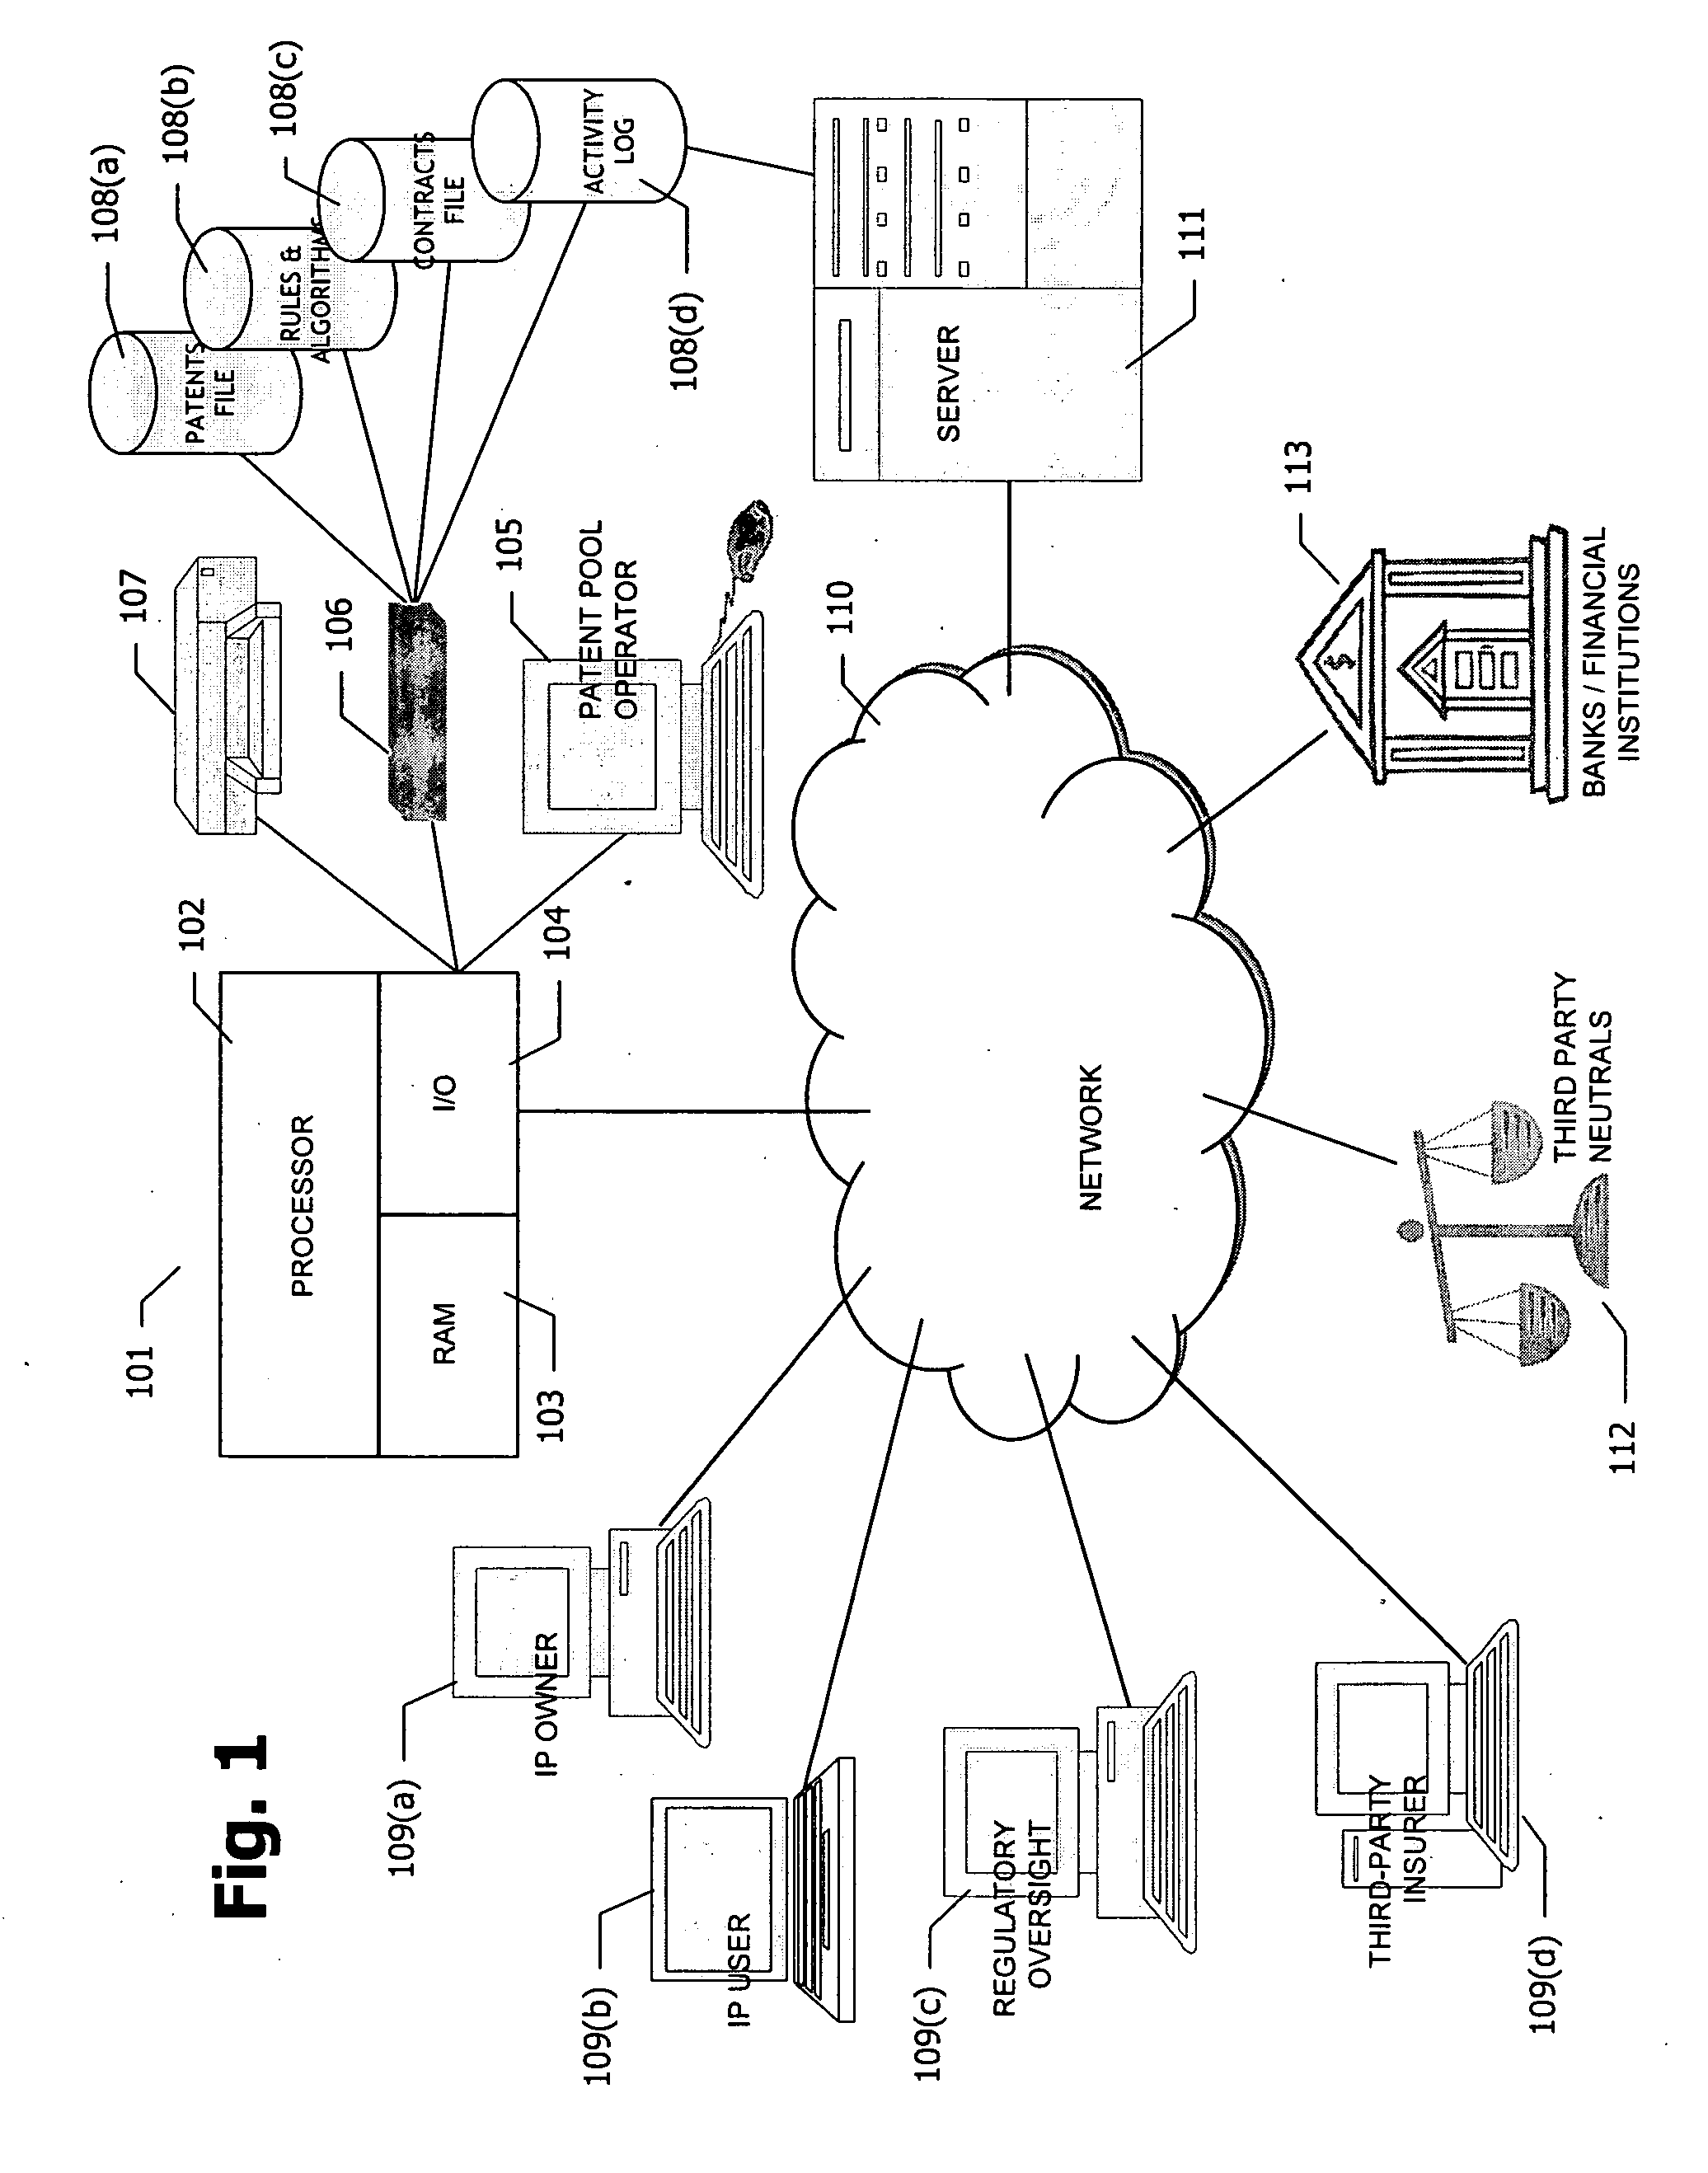 System and method of licensing intellectual property assets